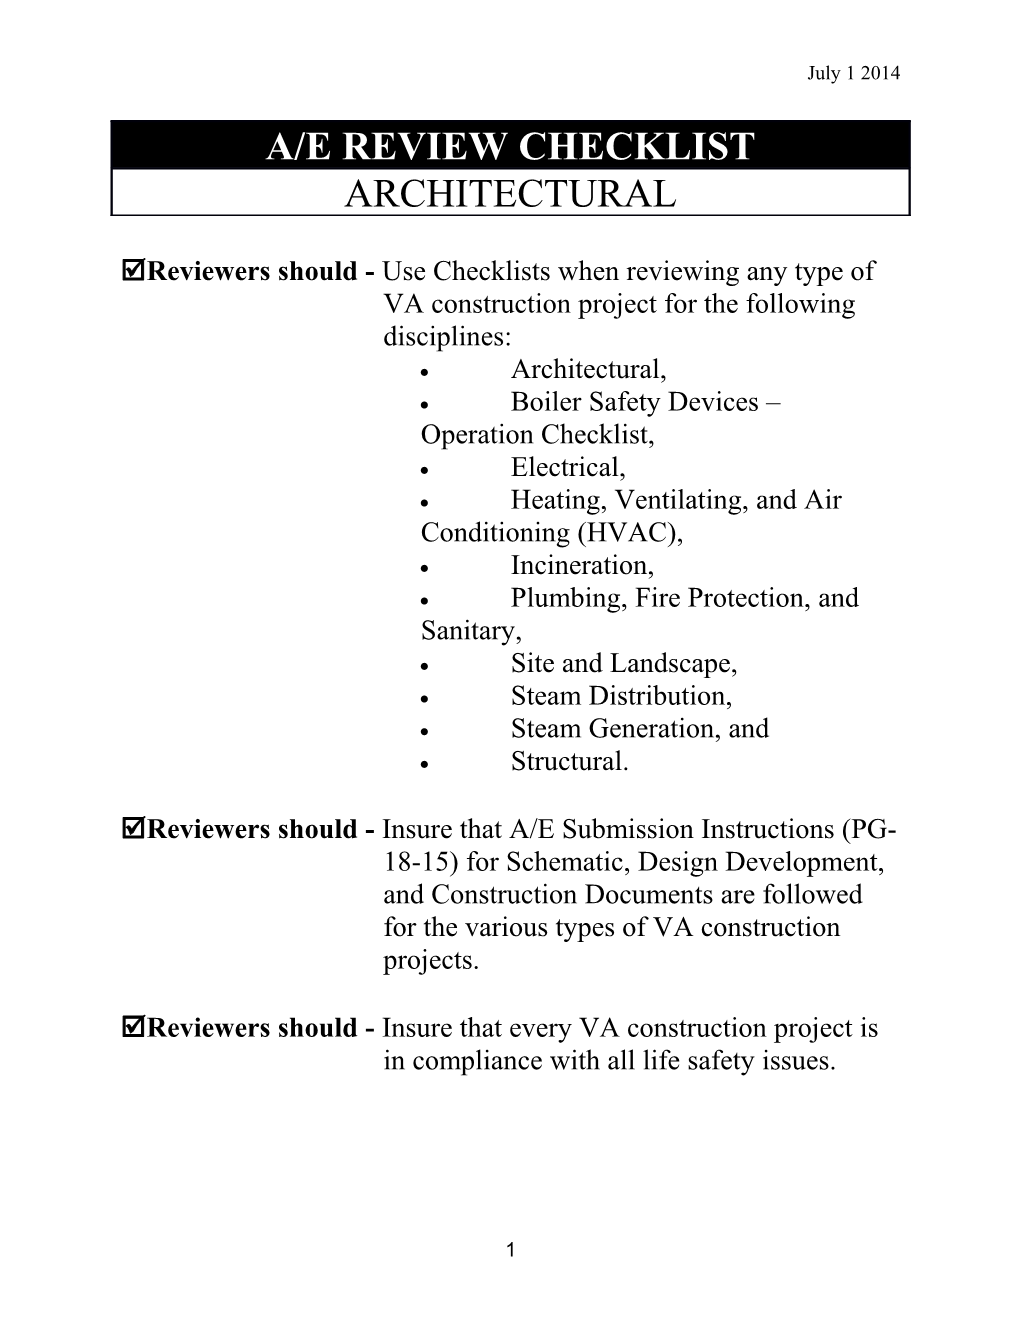 Reviewers Should - Use Checklists When Reviewing Any Type of VA Construction Project For